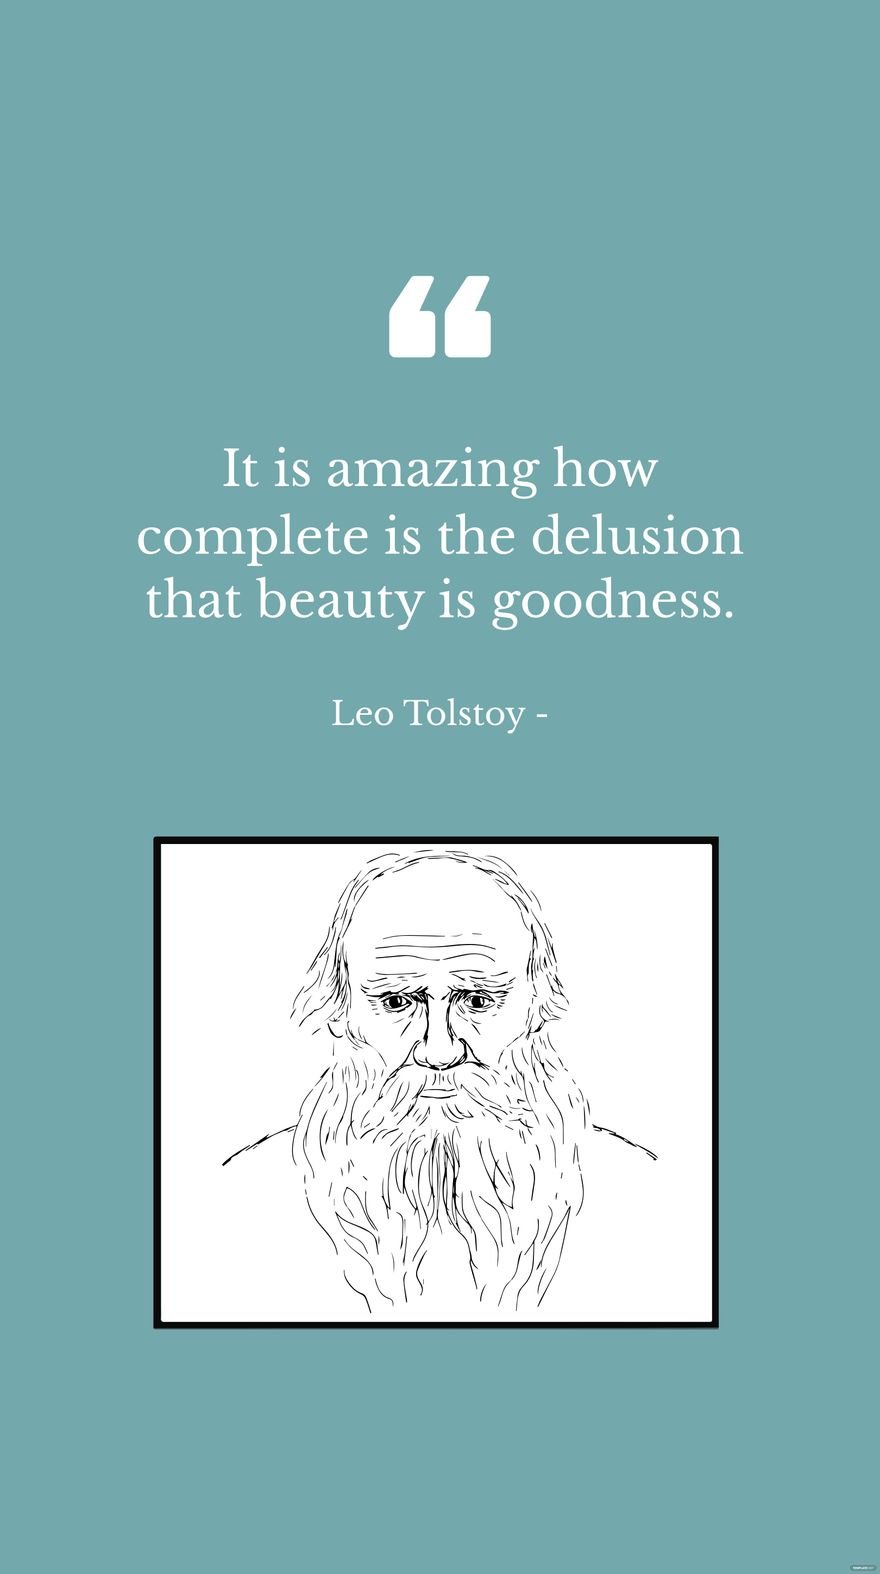 Leo Tolstoy - It is amazing how complete is the delusion that beauty is goodness.